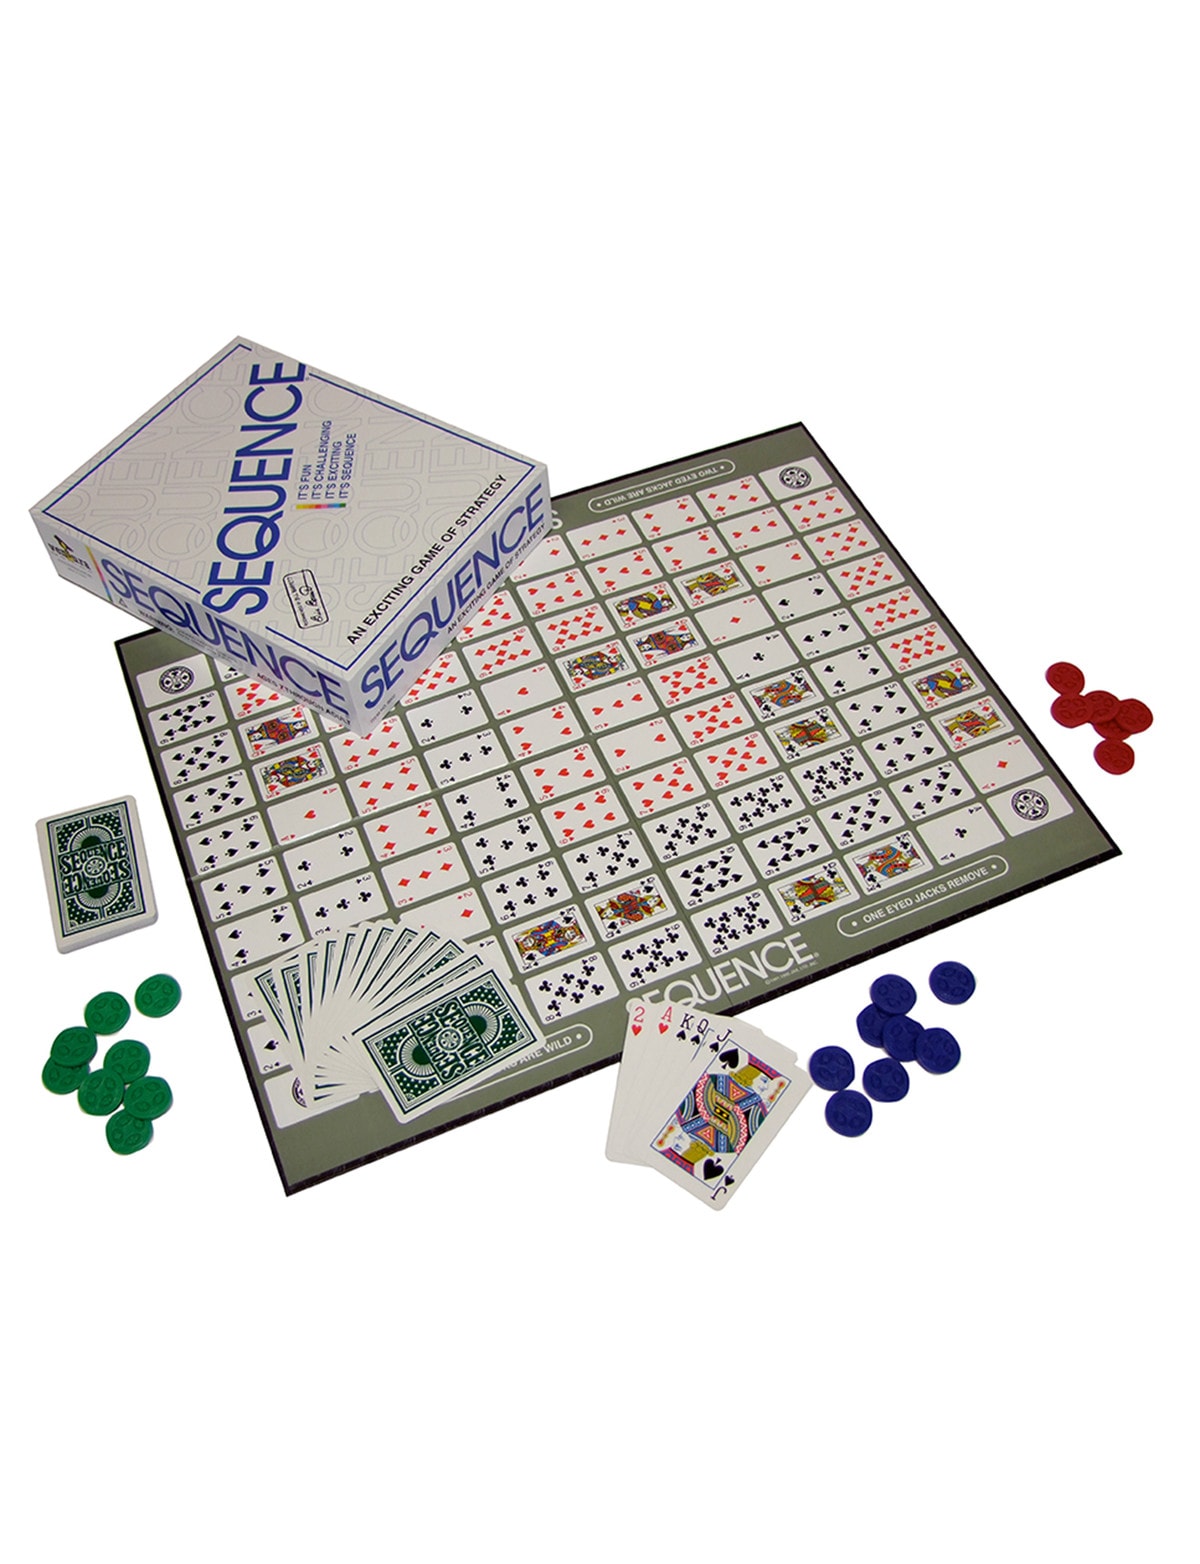 Games Sequence Board - Games, Cards & Puzzles